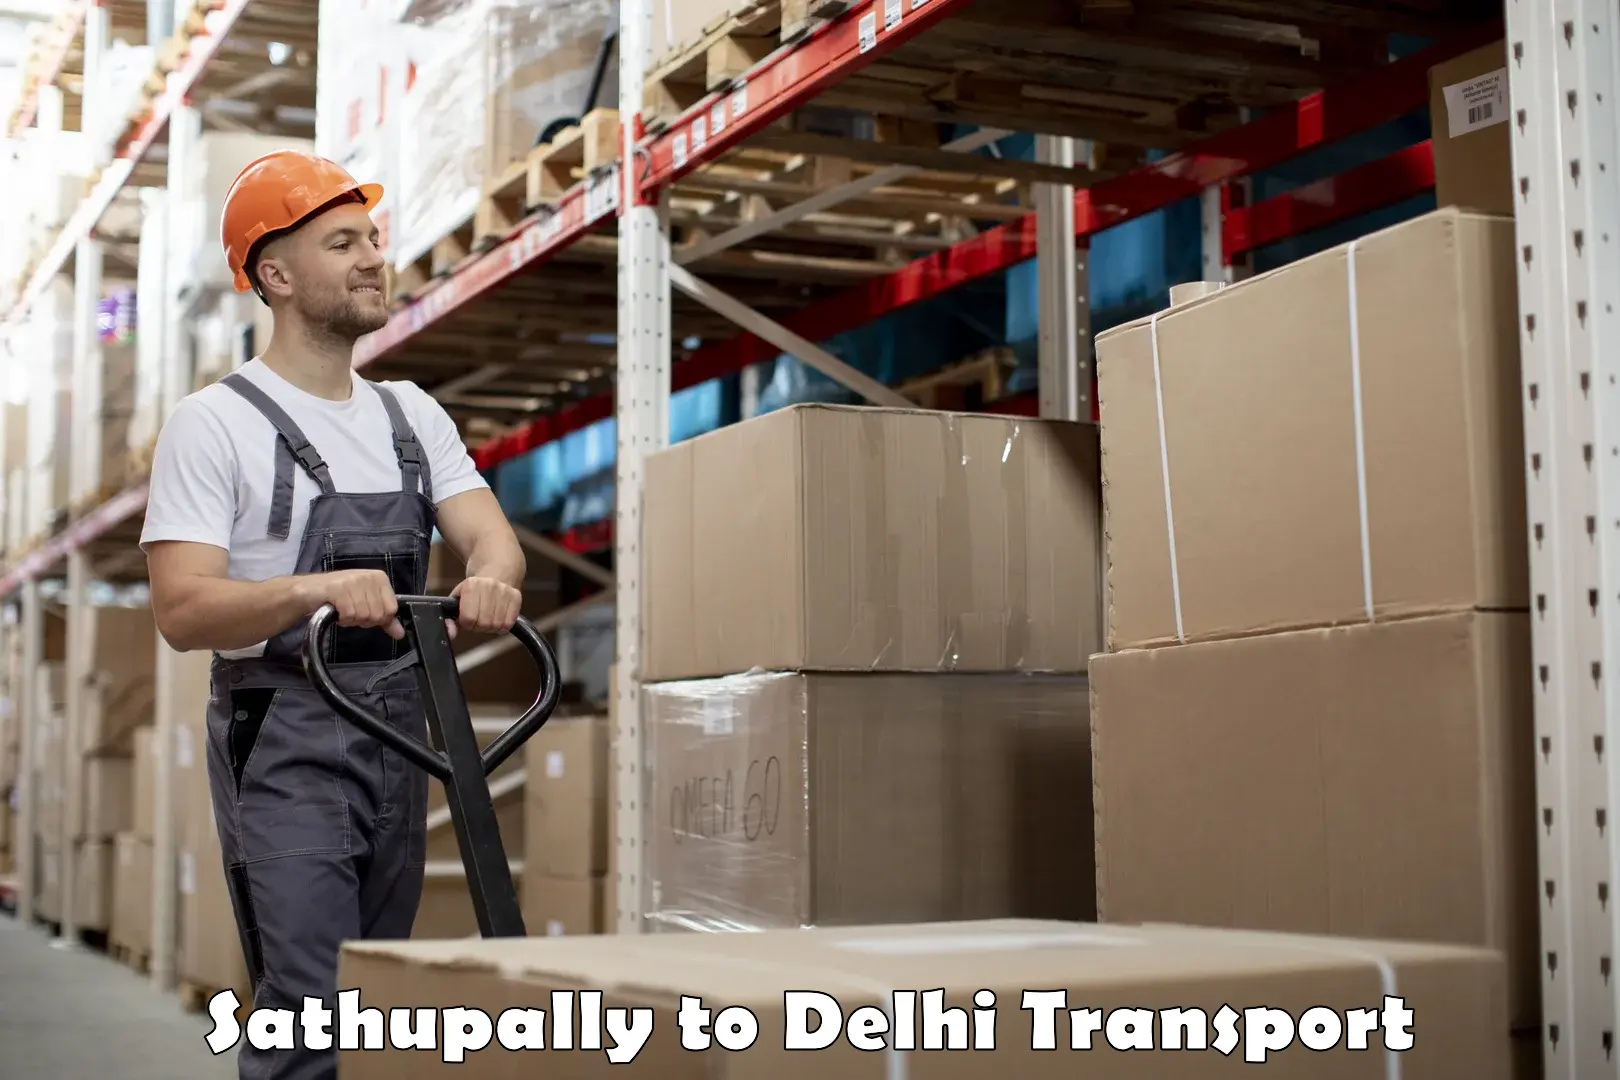 Online transport service Sathupally to NIT Delhi